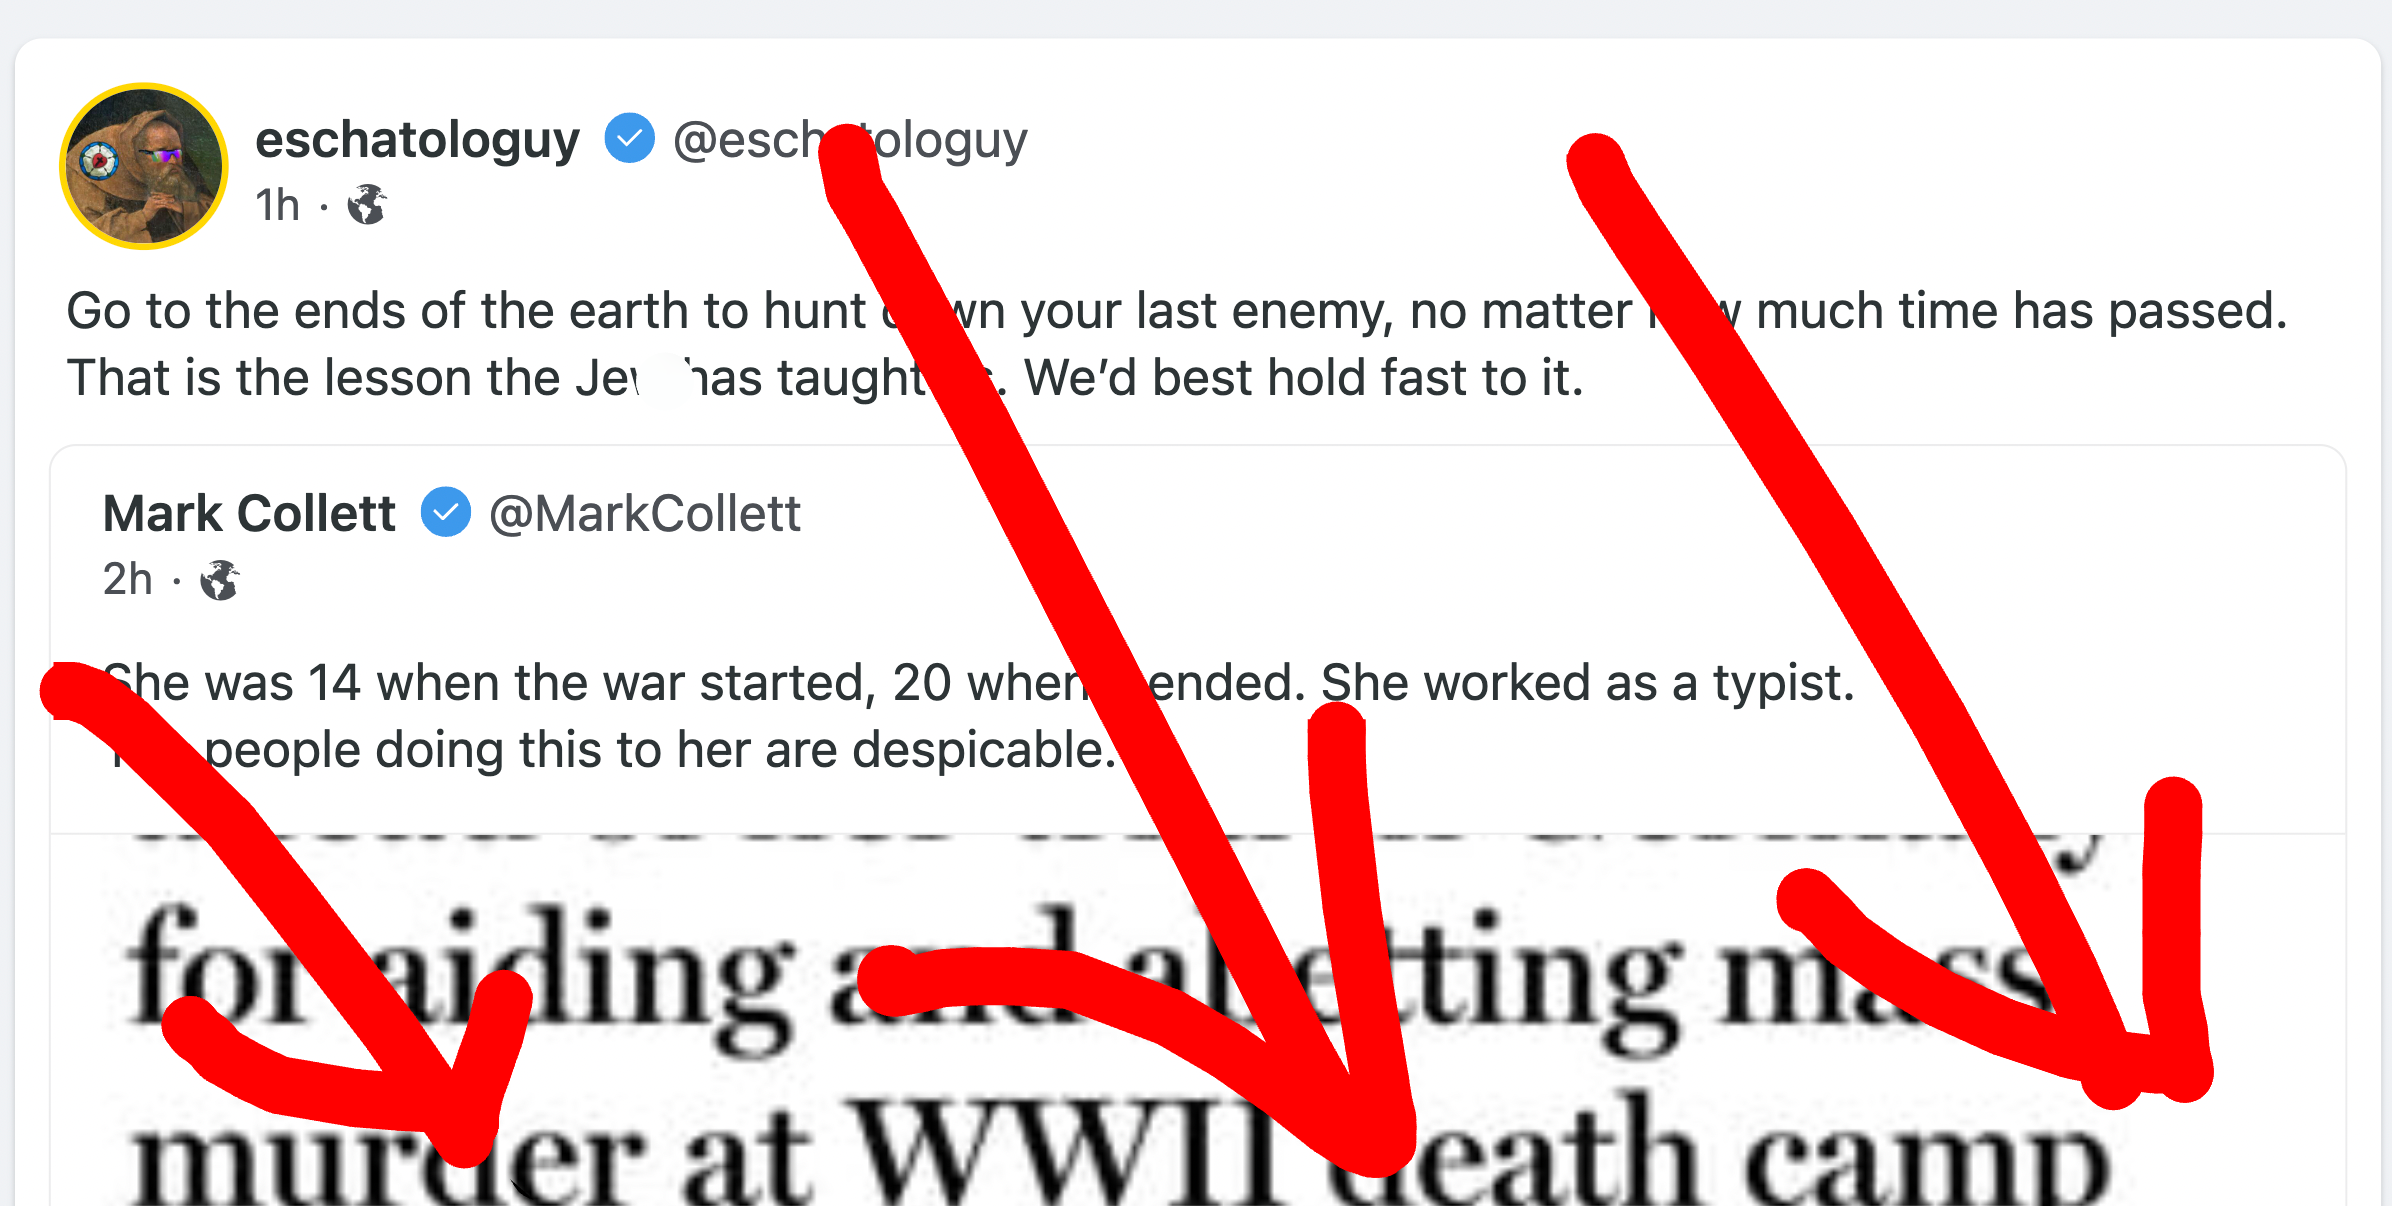 Woe on Gab reposting another user lamenting the arrest of a Nazi collaborator who was 14 when the war started and worked as a typist. Eschatologuy: "Go to the ends of the earth to hunt down your last enemy, no matter how much time has passed. That is the lesson the J*w has taught us. We'd best hold to it.